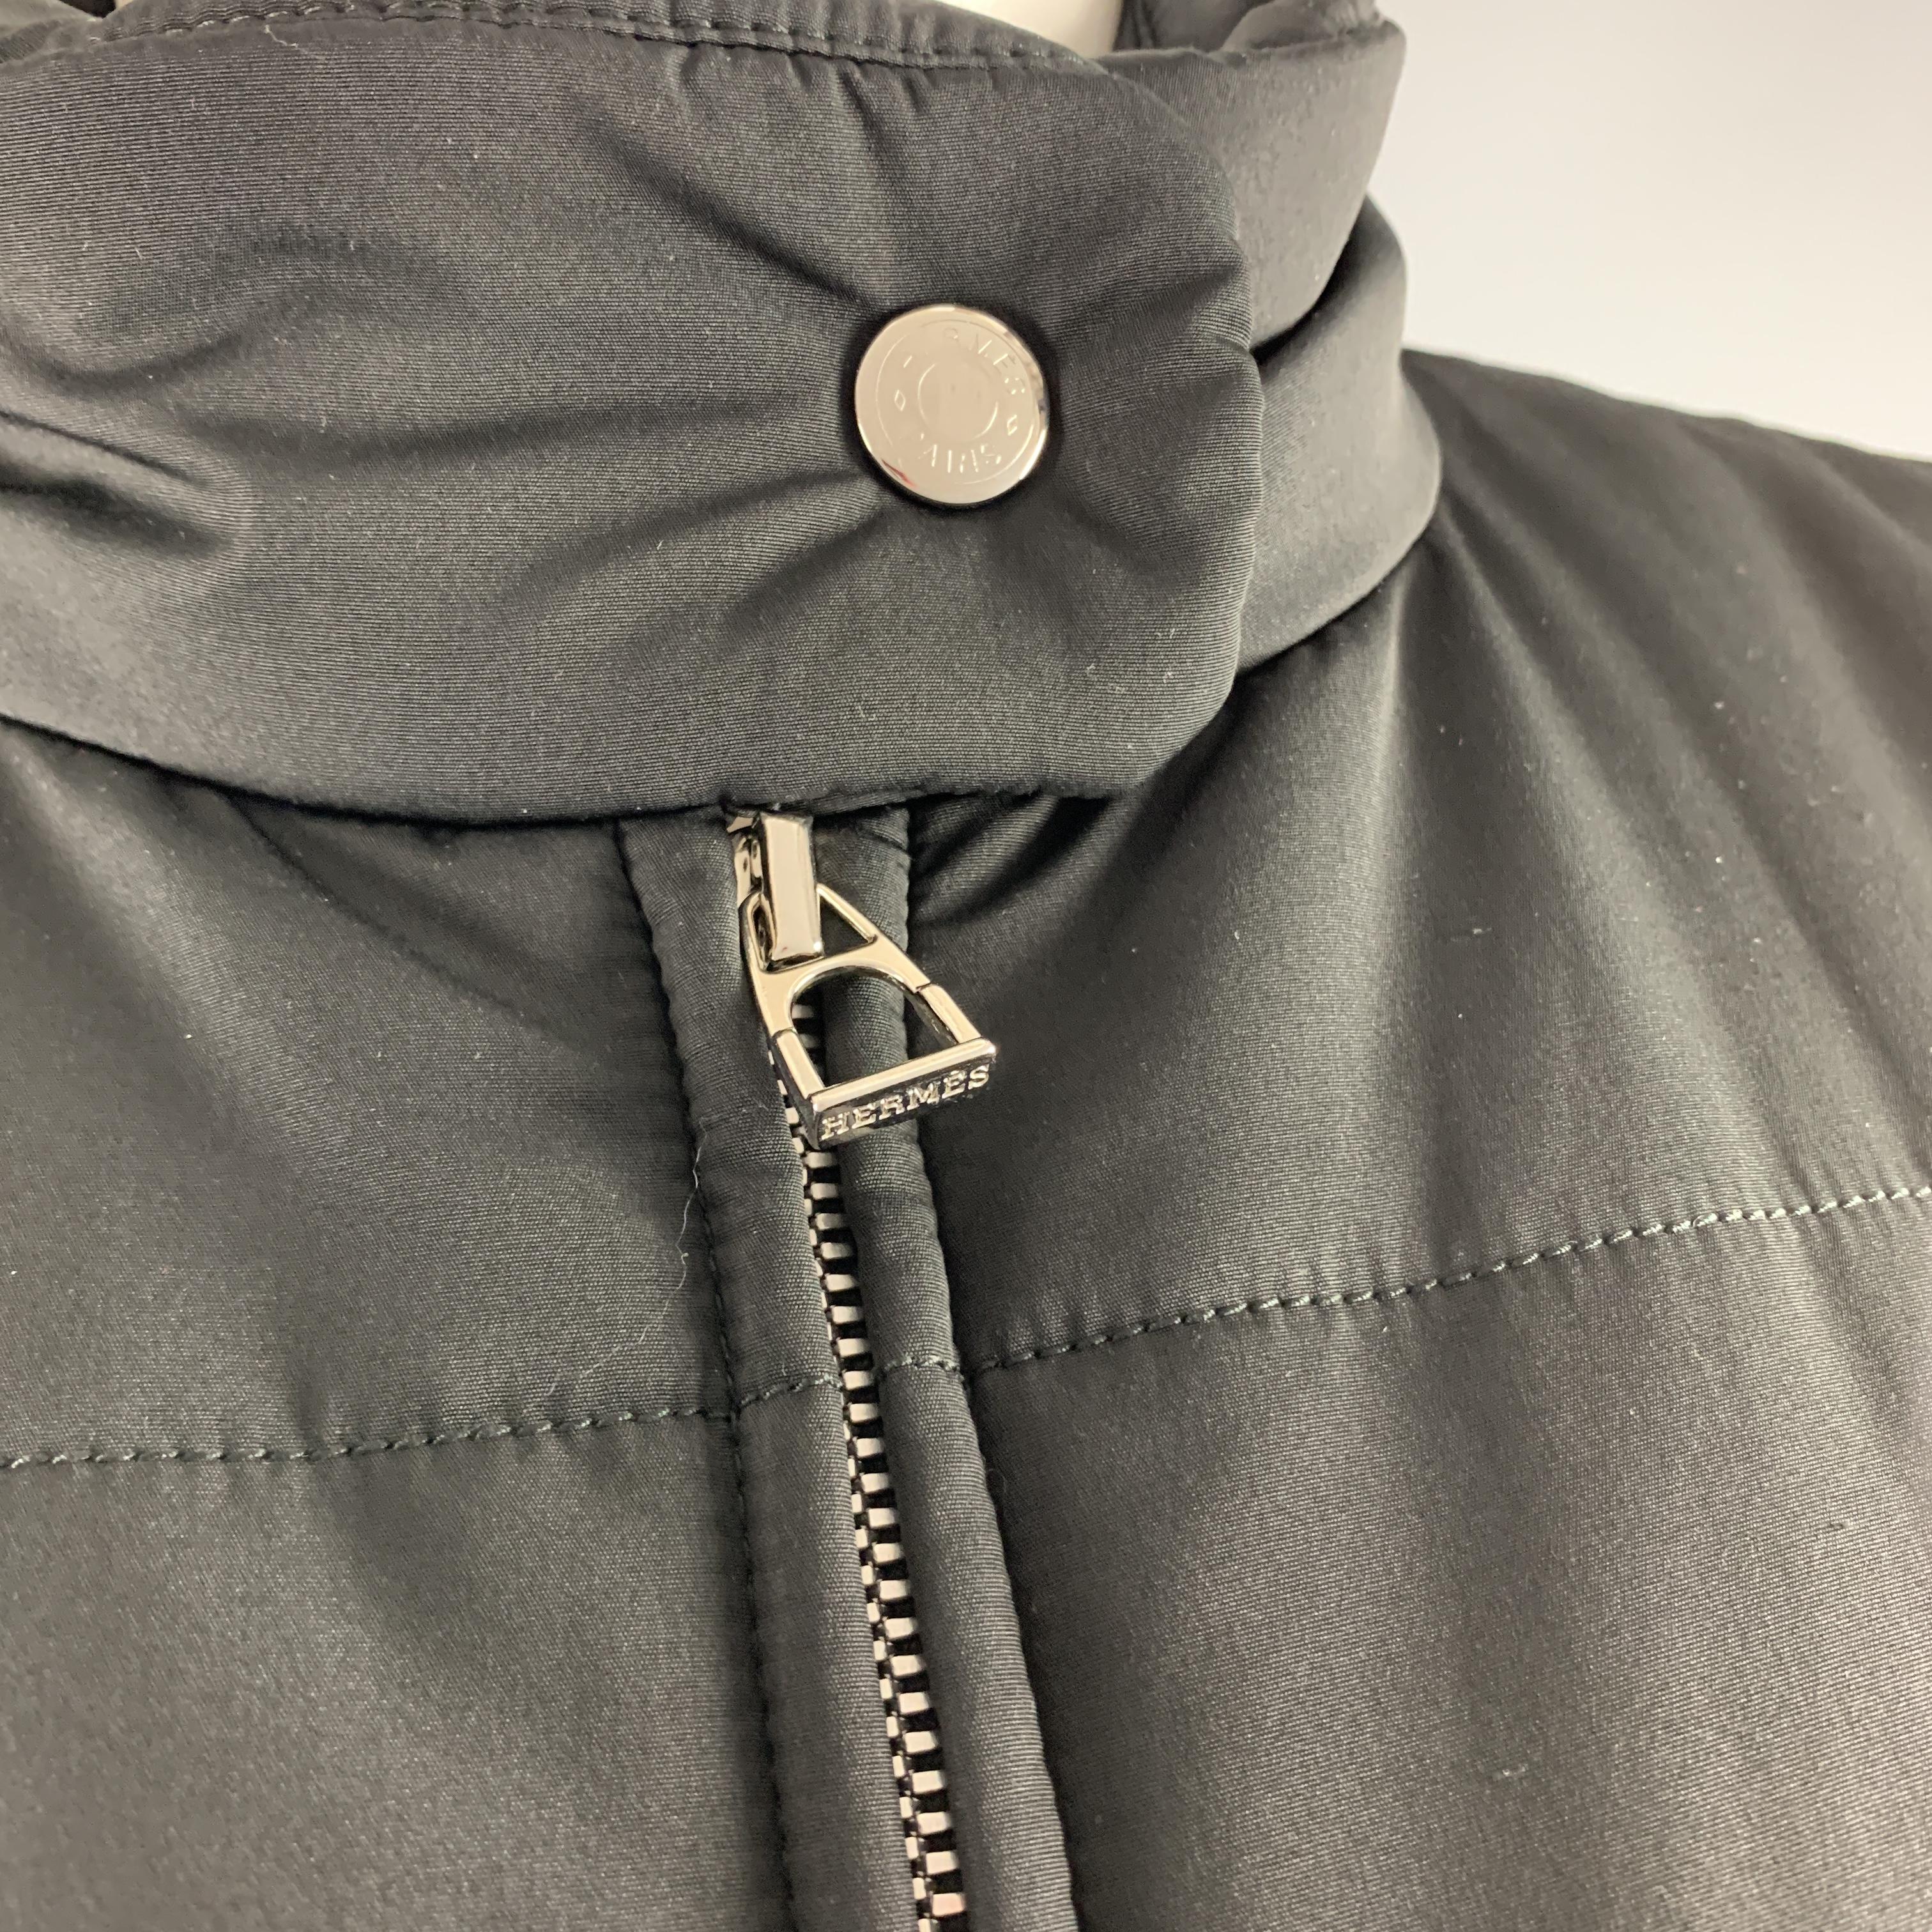 HERMES cropped Jockey Technical Jacket comes in quilted padded nylon with a high snap collar, double zip front, and zip pockets. Made in Italy.

Excellent Pre-Owned Condition.
Marked: XS

Measurements:

Shoulder: 14 in.
Bust: 37 in.
Sleeve: 25